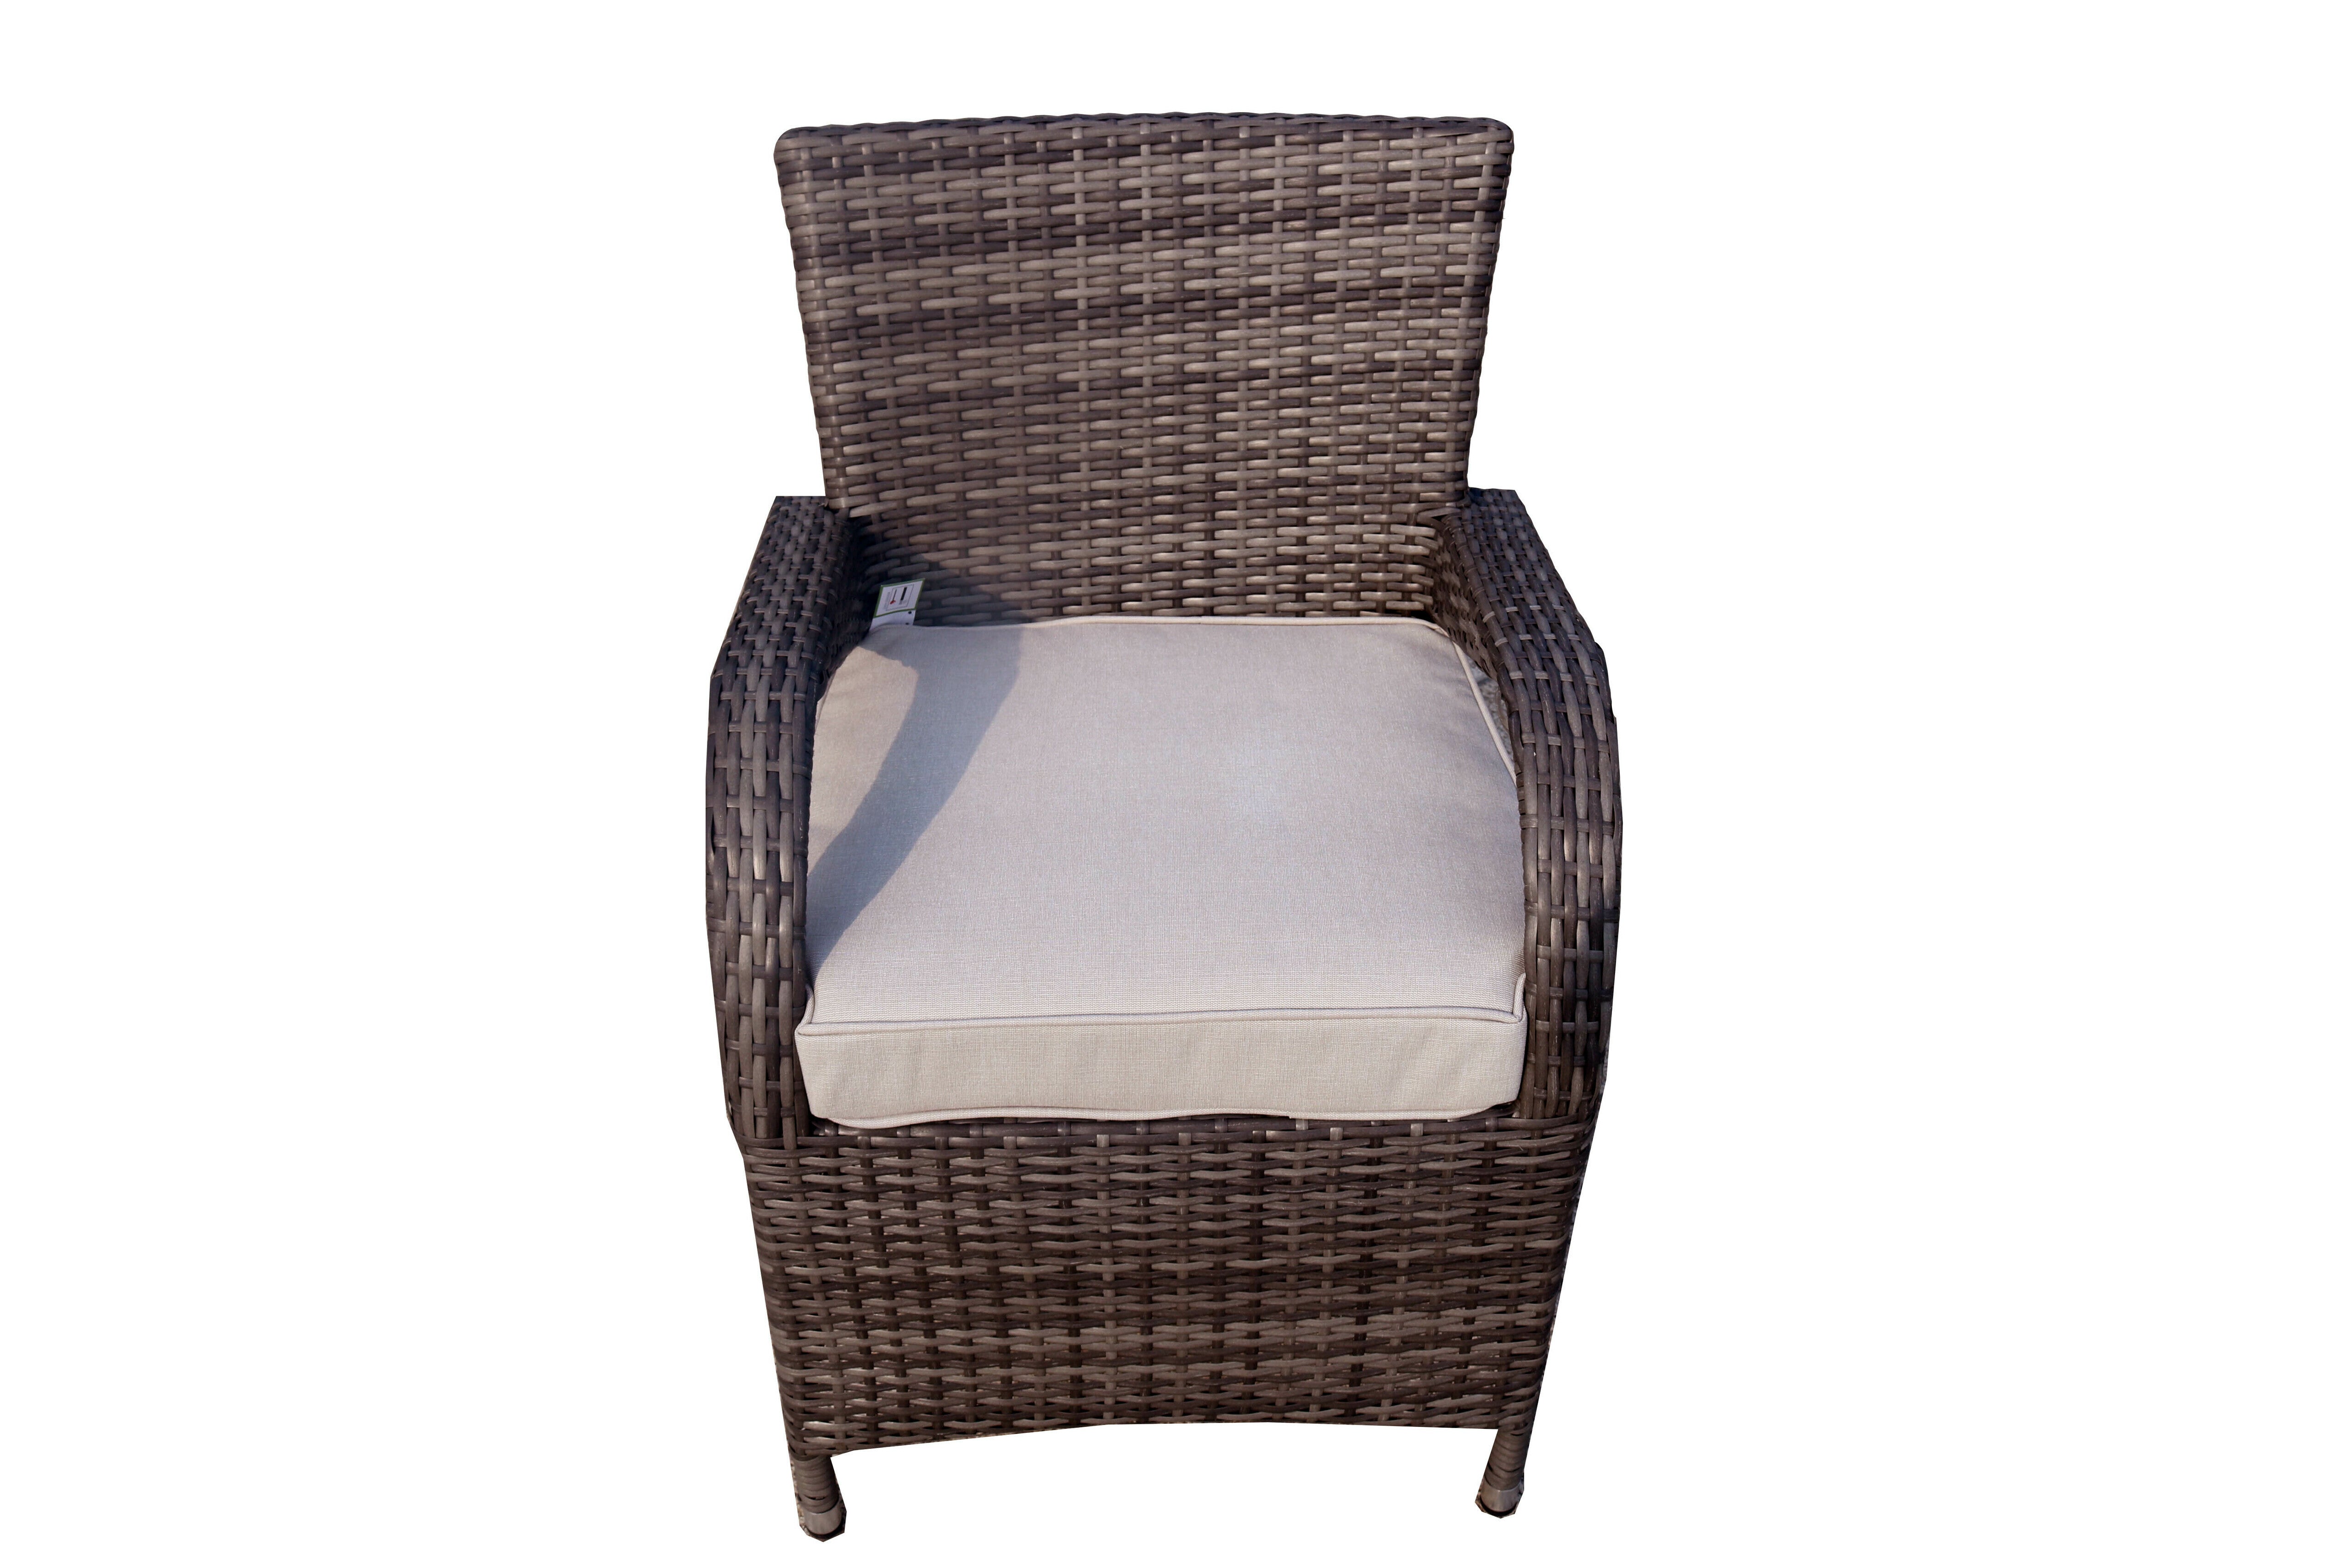 2 piece Chair for 7 Piece Dining Set with Cushions